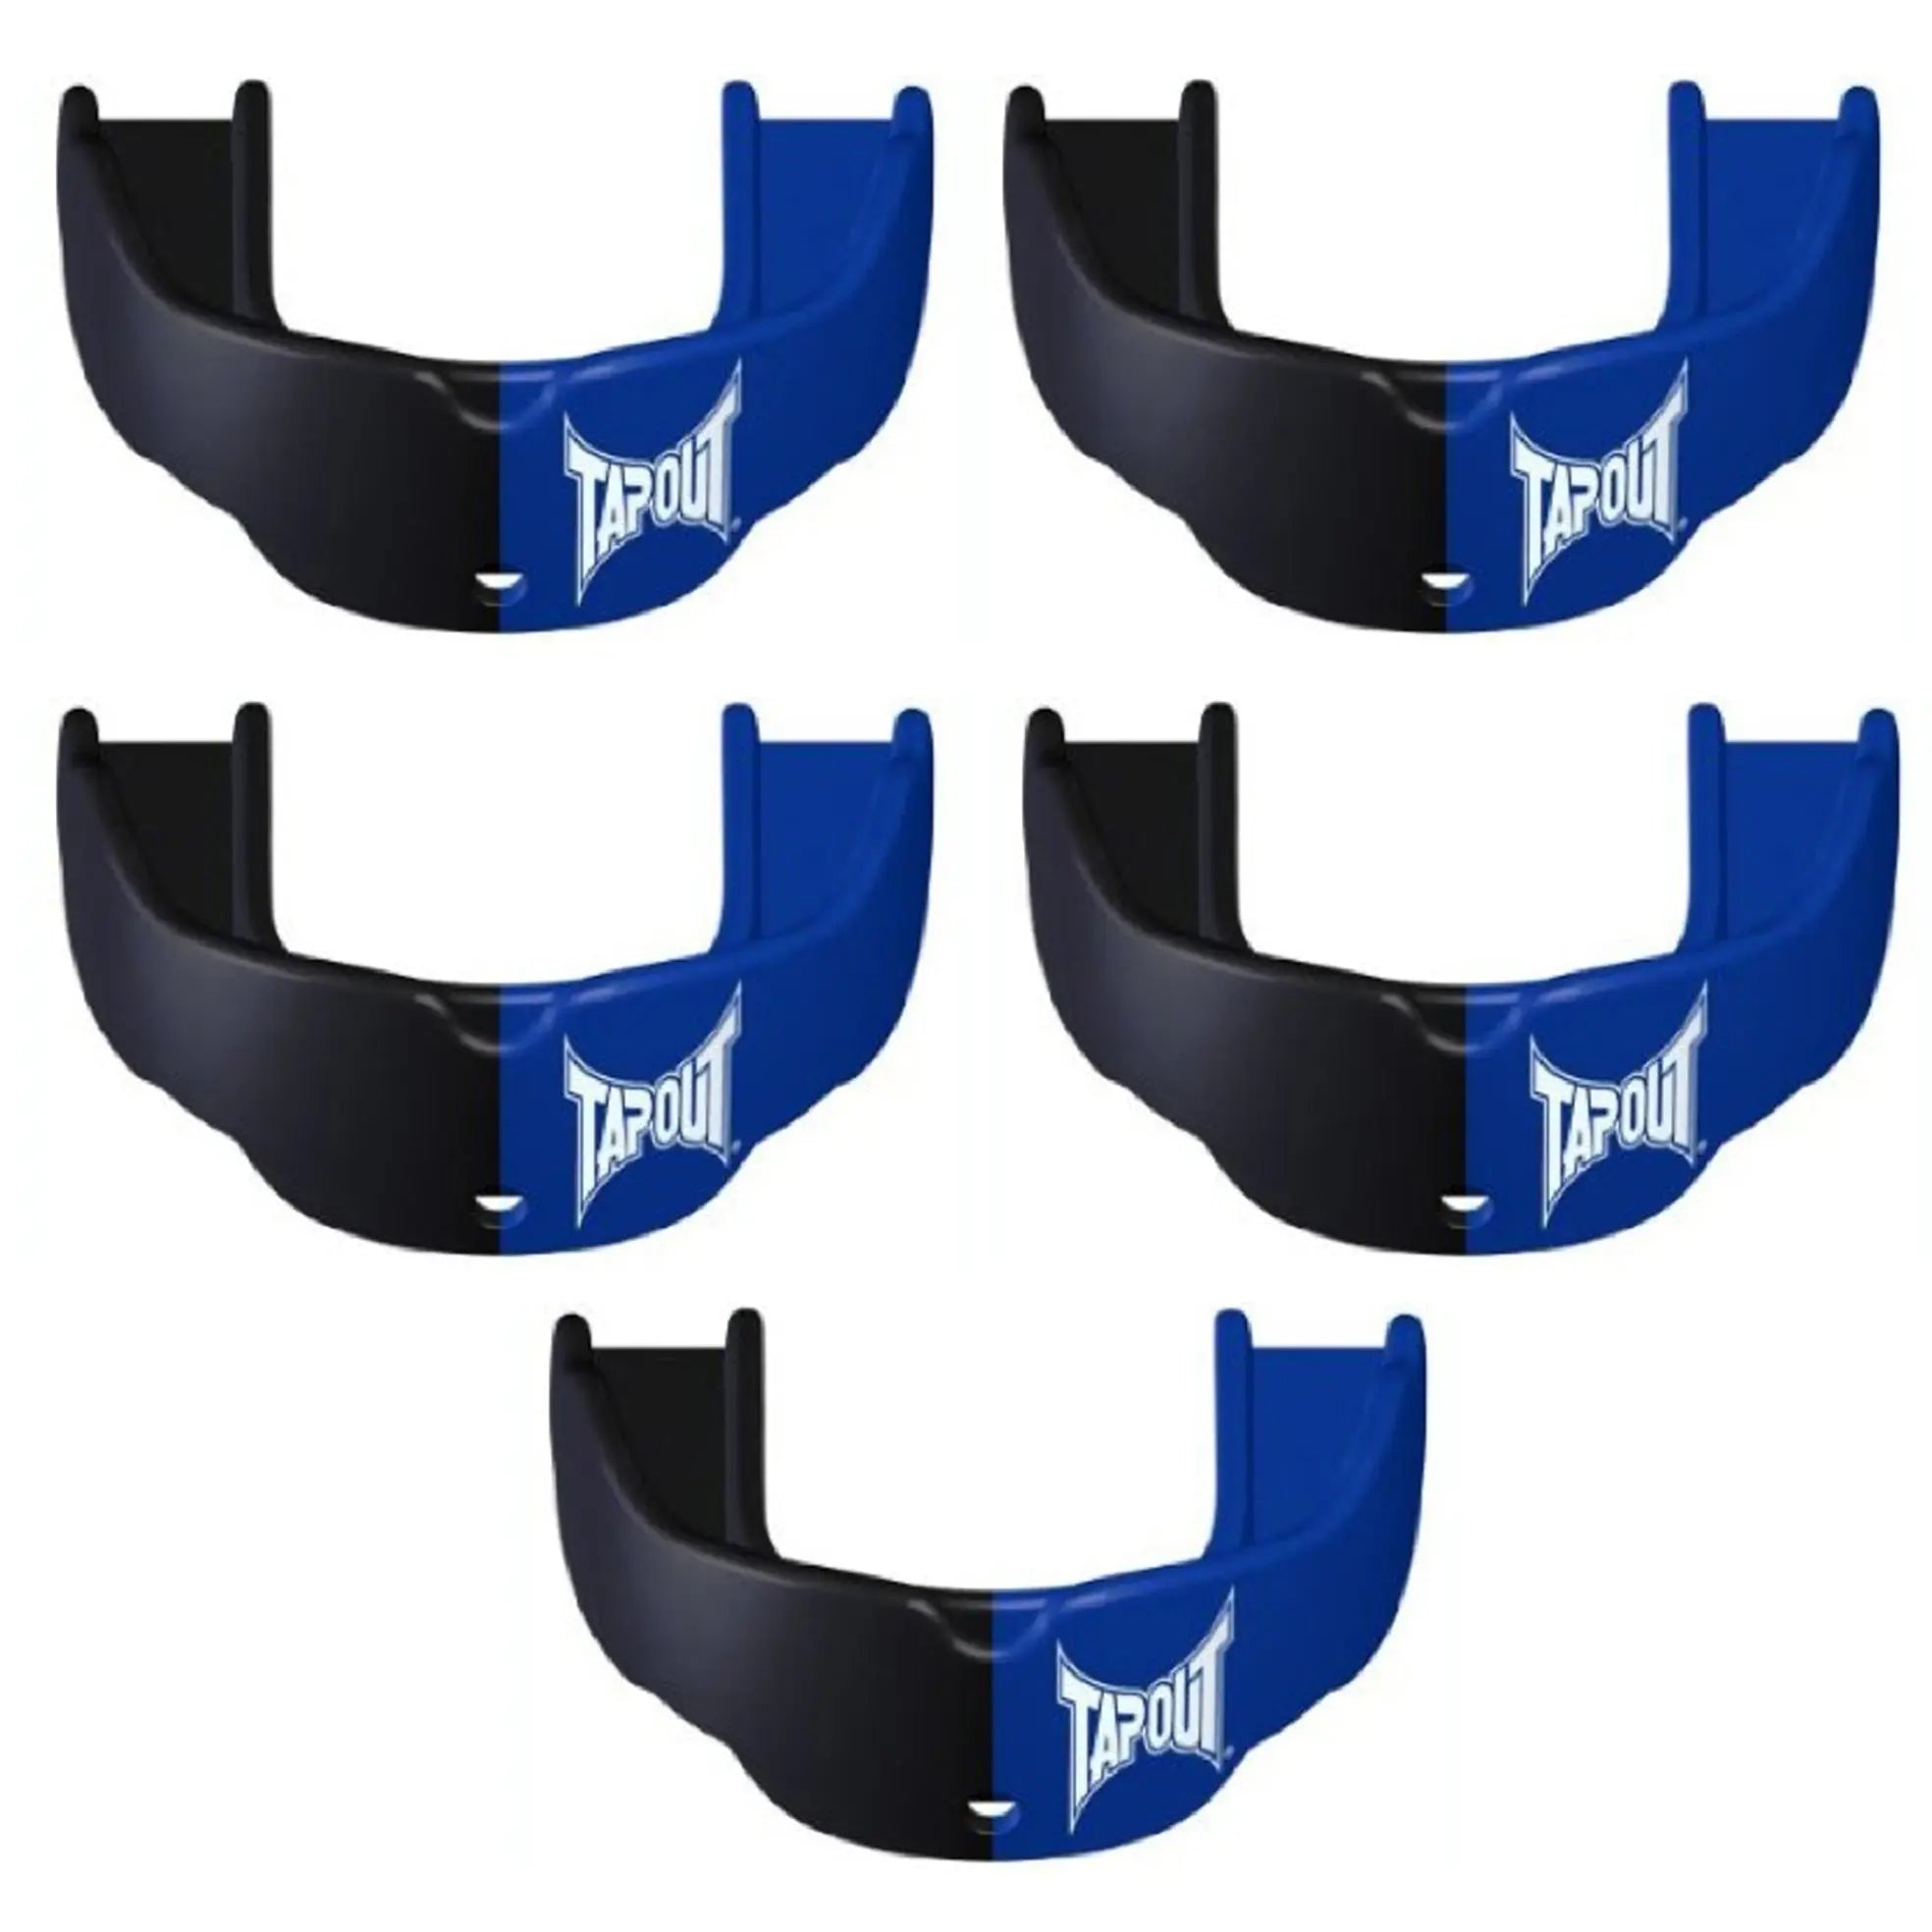 Tapout Adult Protective Sports Mouthguard with Strap 5-Pack  - Blue/Black Tapout